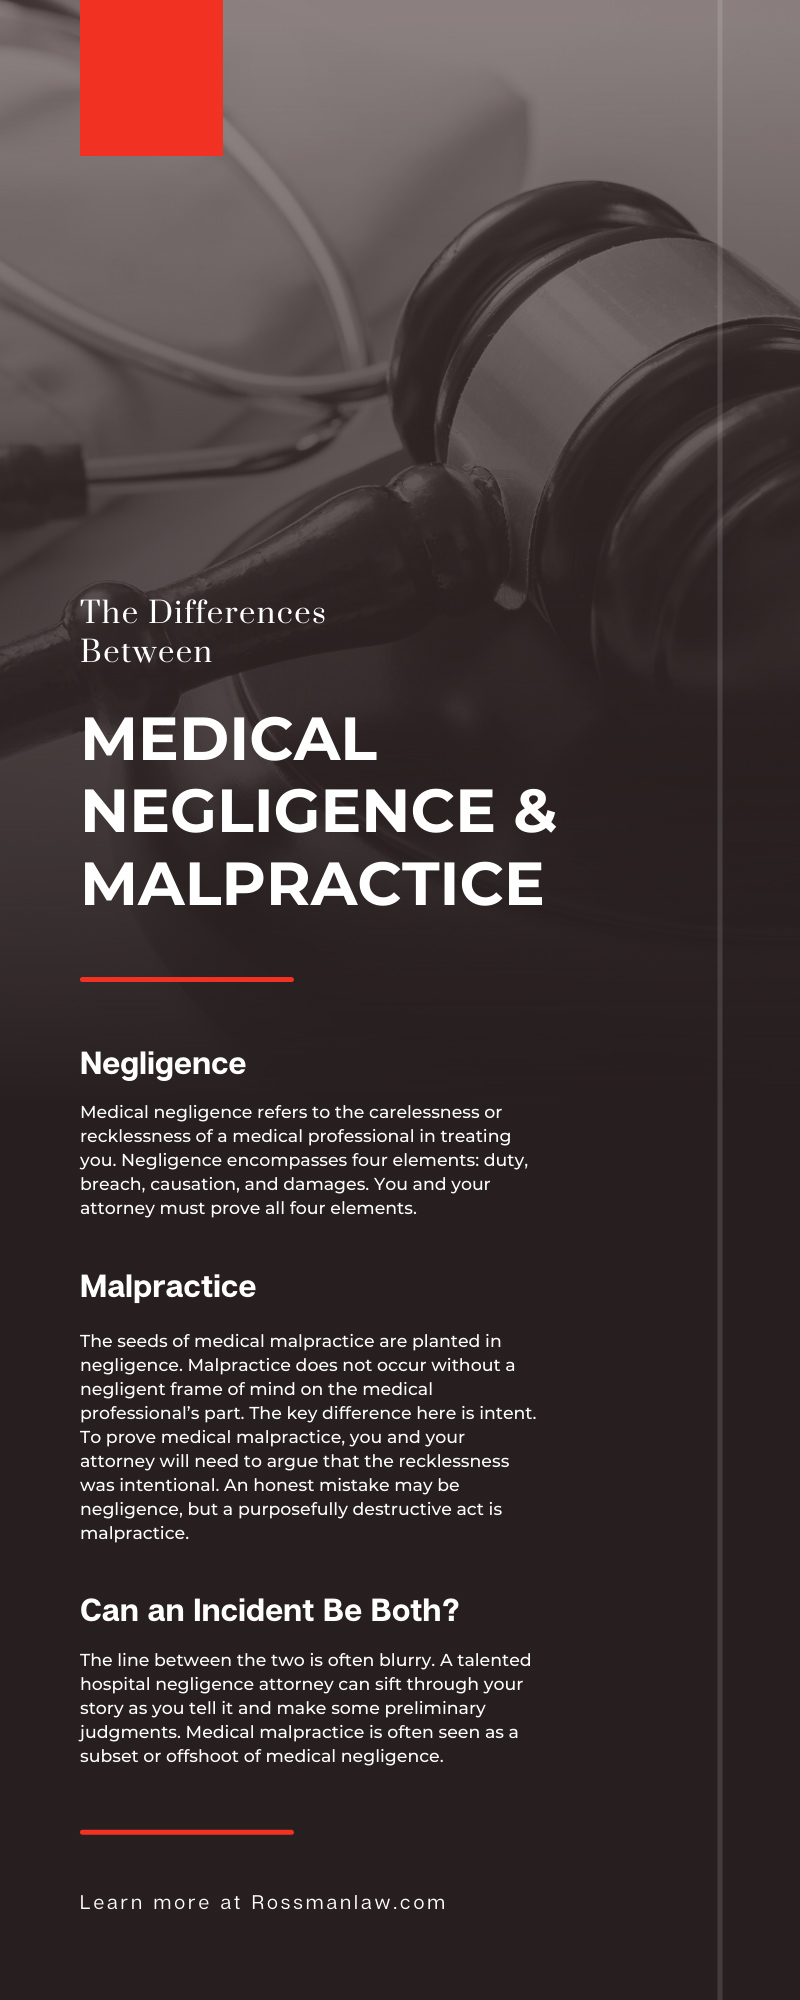 The Differences Between Medical Negligence & Malpractice